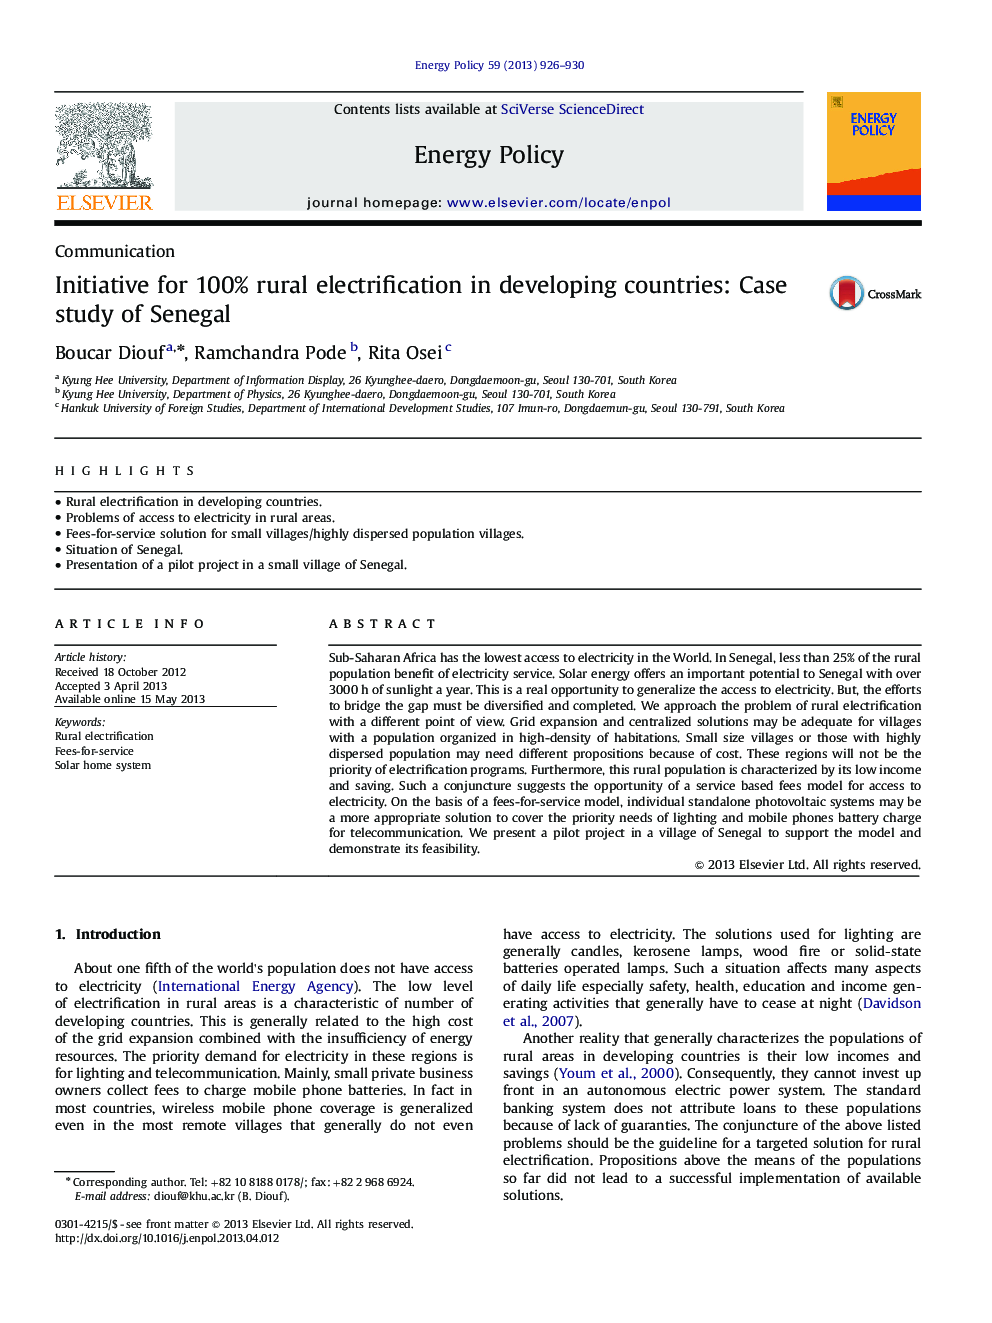 Initiative for 100% rural electrification in developing countries: Case study of Senegal